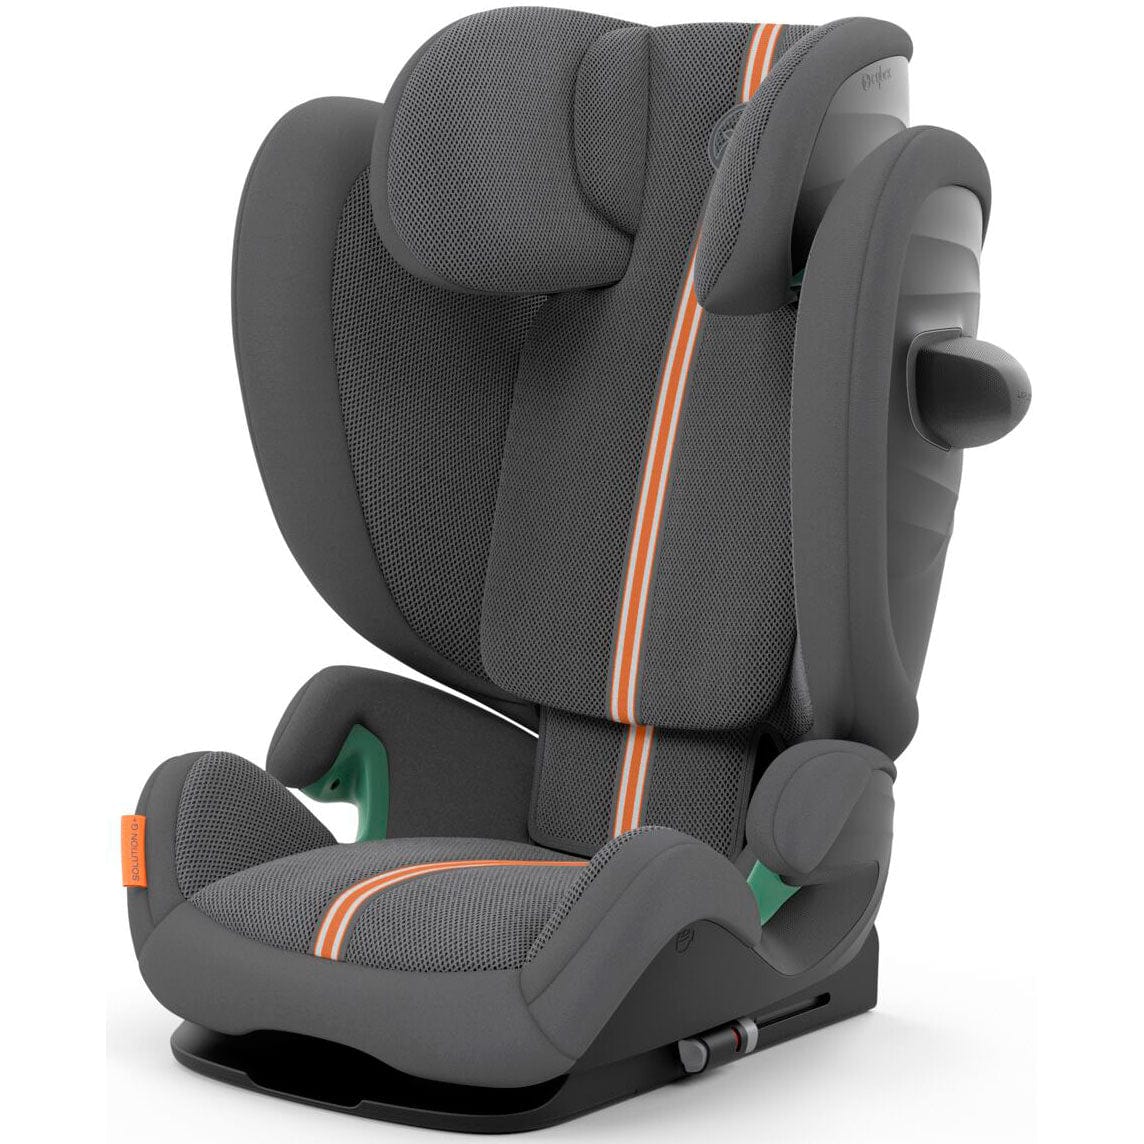 Cybex highback booster seats Cybex Solution G i-Fix Plus Highback Booster in Lava Grey 523001101